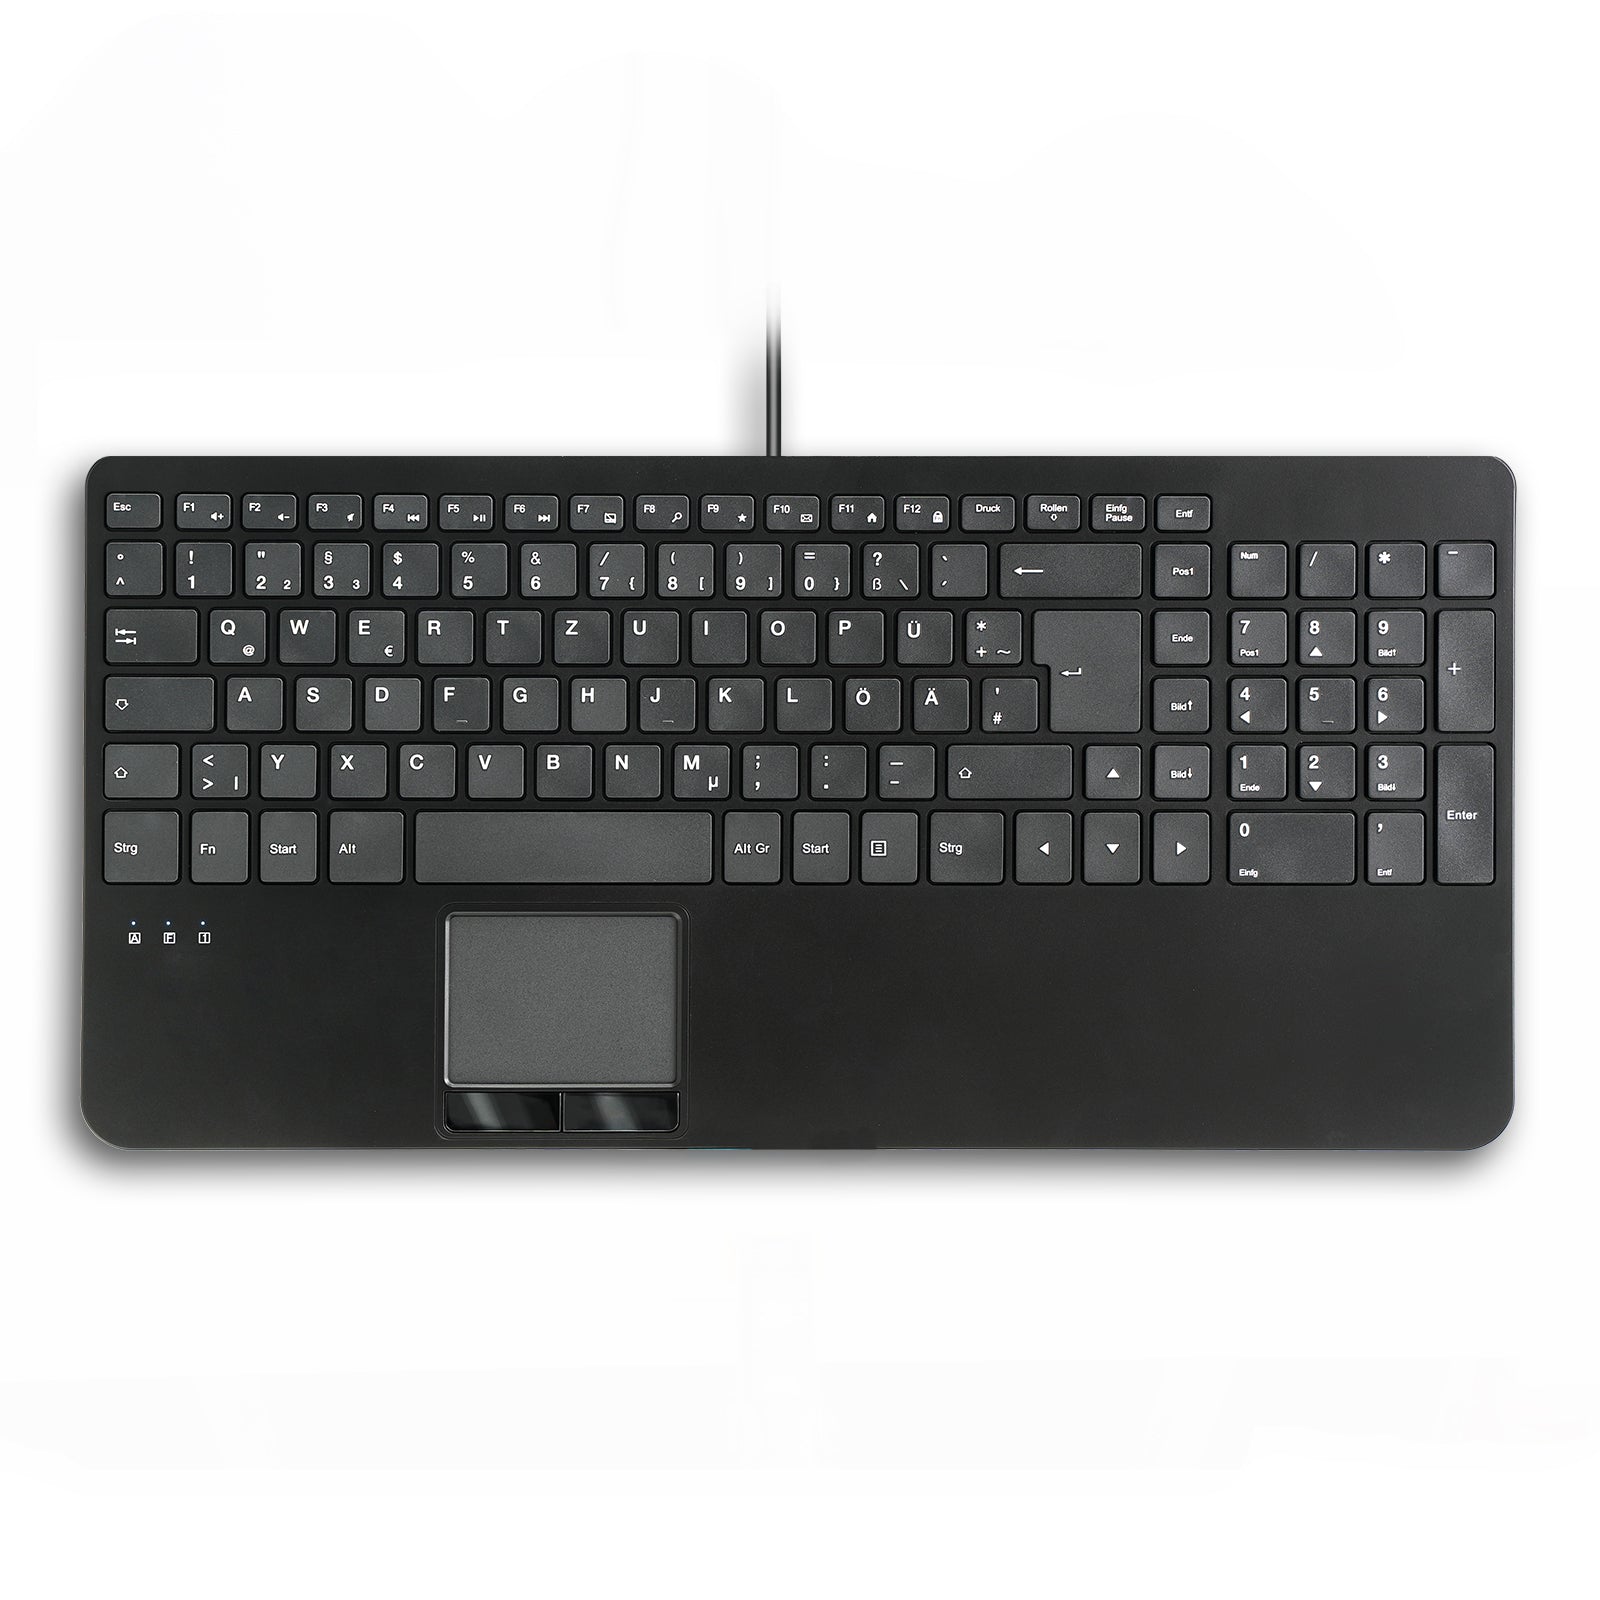 PERIBOARD-534 H Wired Compact US Keyboard with Touchpad & 2 Hubs - Perixx Europe